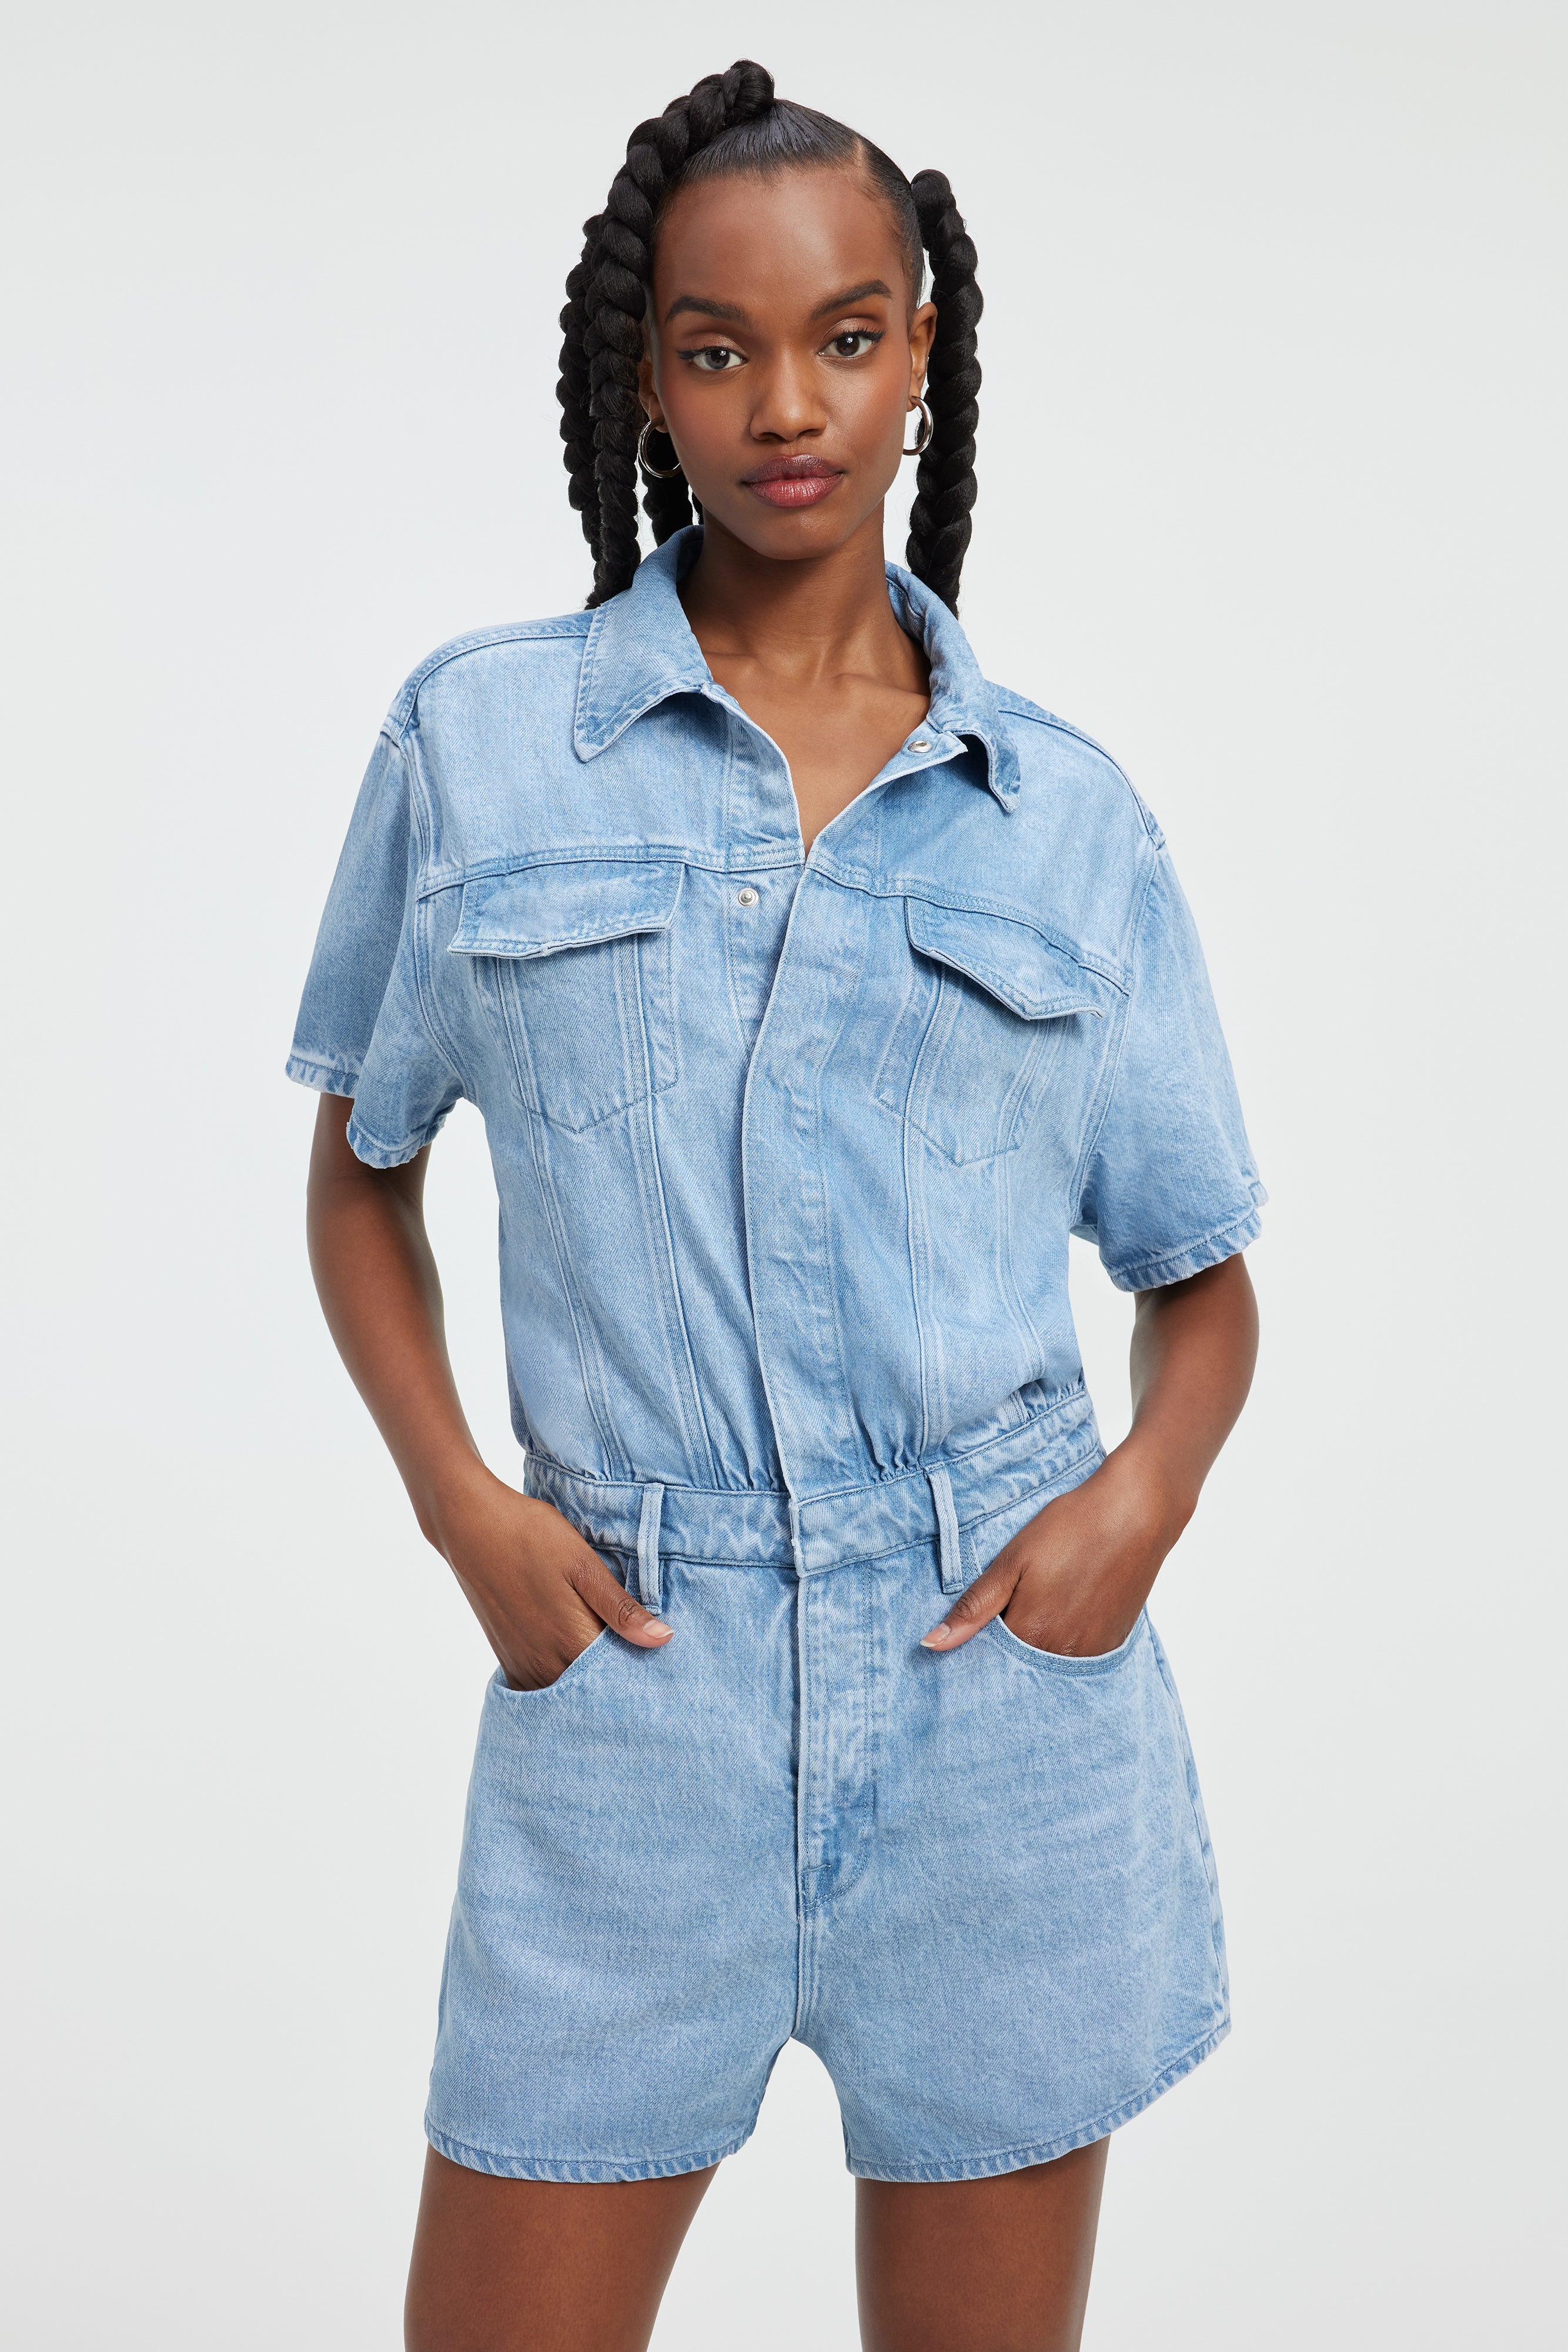 Summer Women Short Sleeve Romper Fashion Casual Blank Button up Playsuit Denim  Short Jumpsuit - China Sports Wear and Pull-in Pants price |  Made-in-China.com